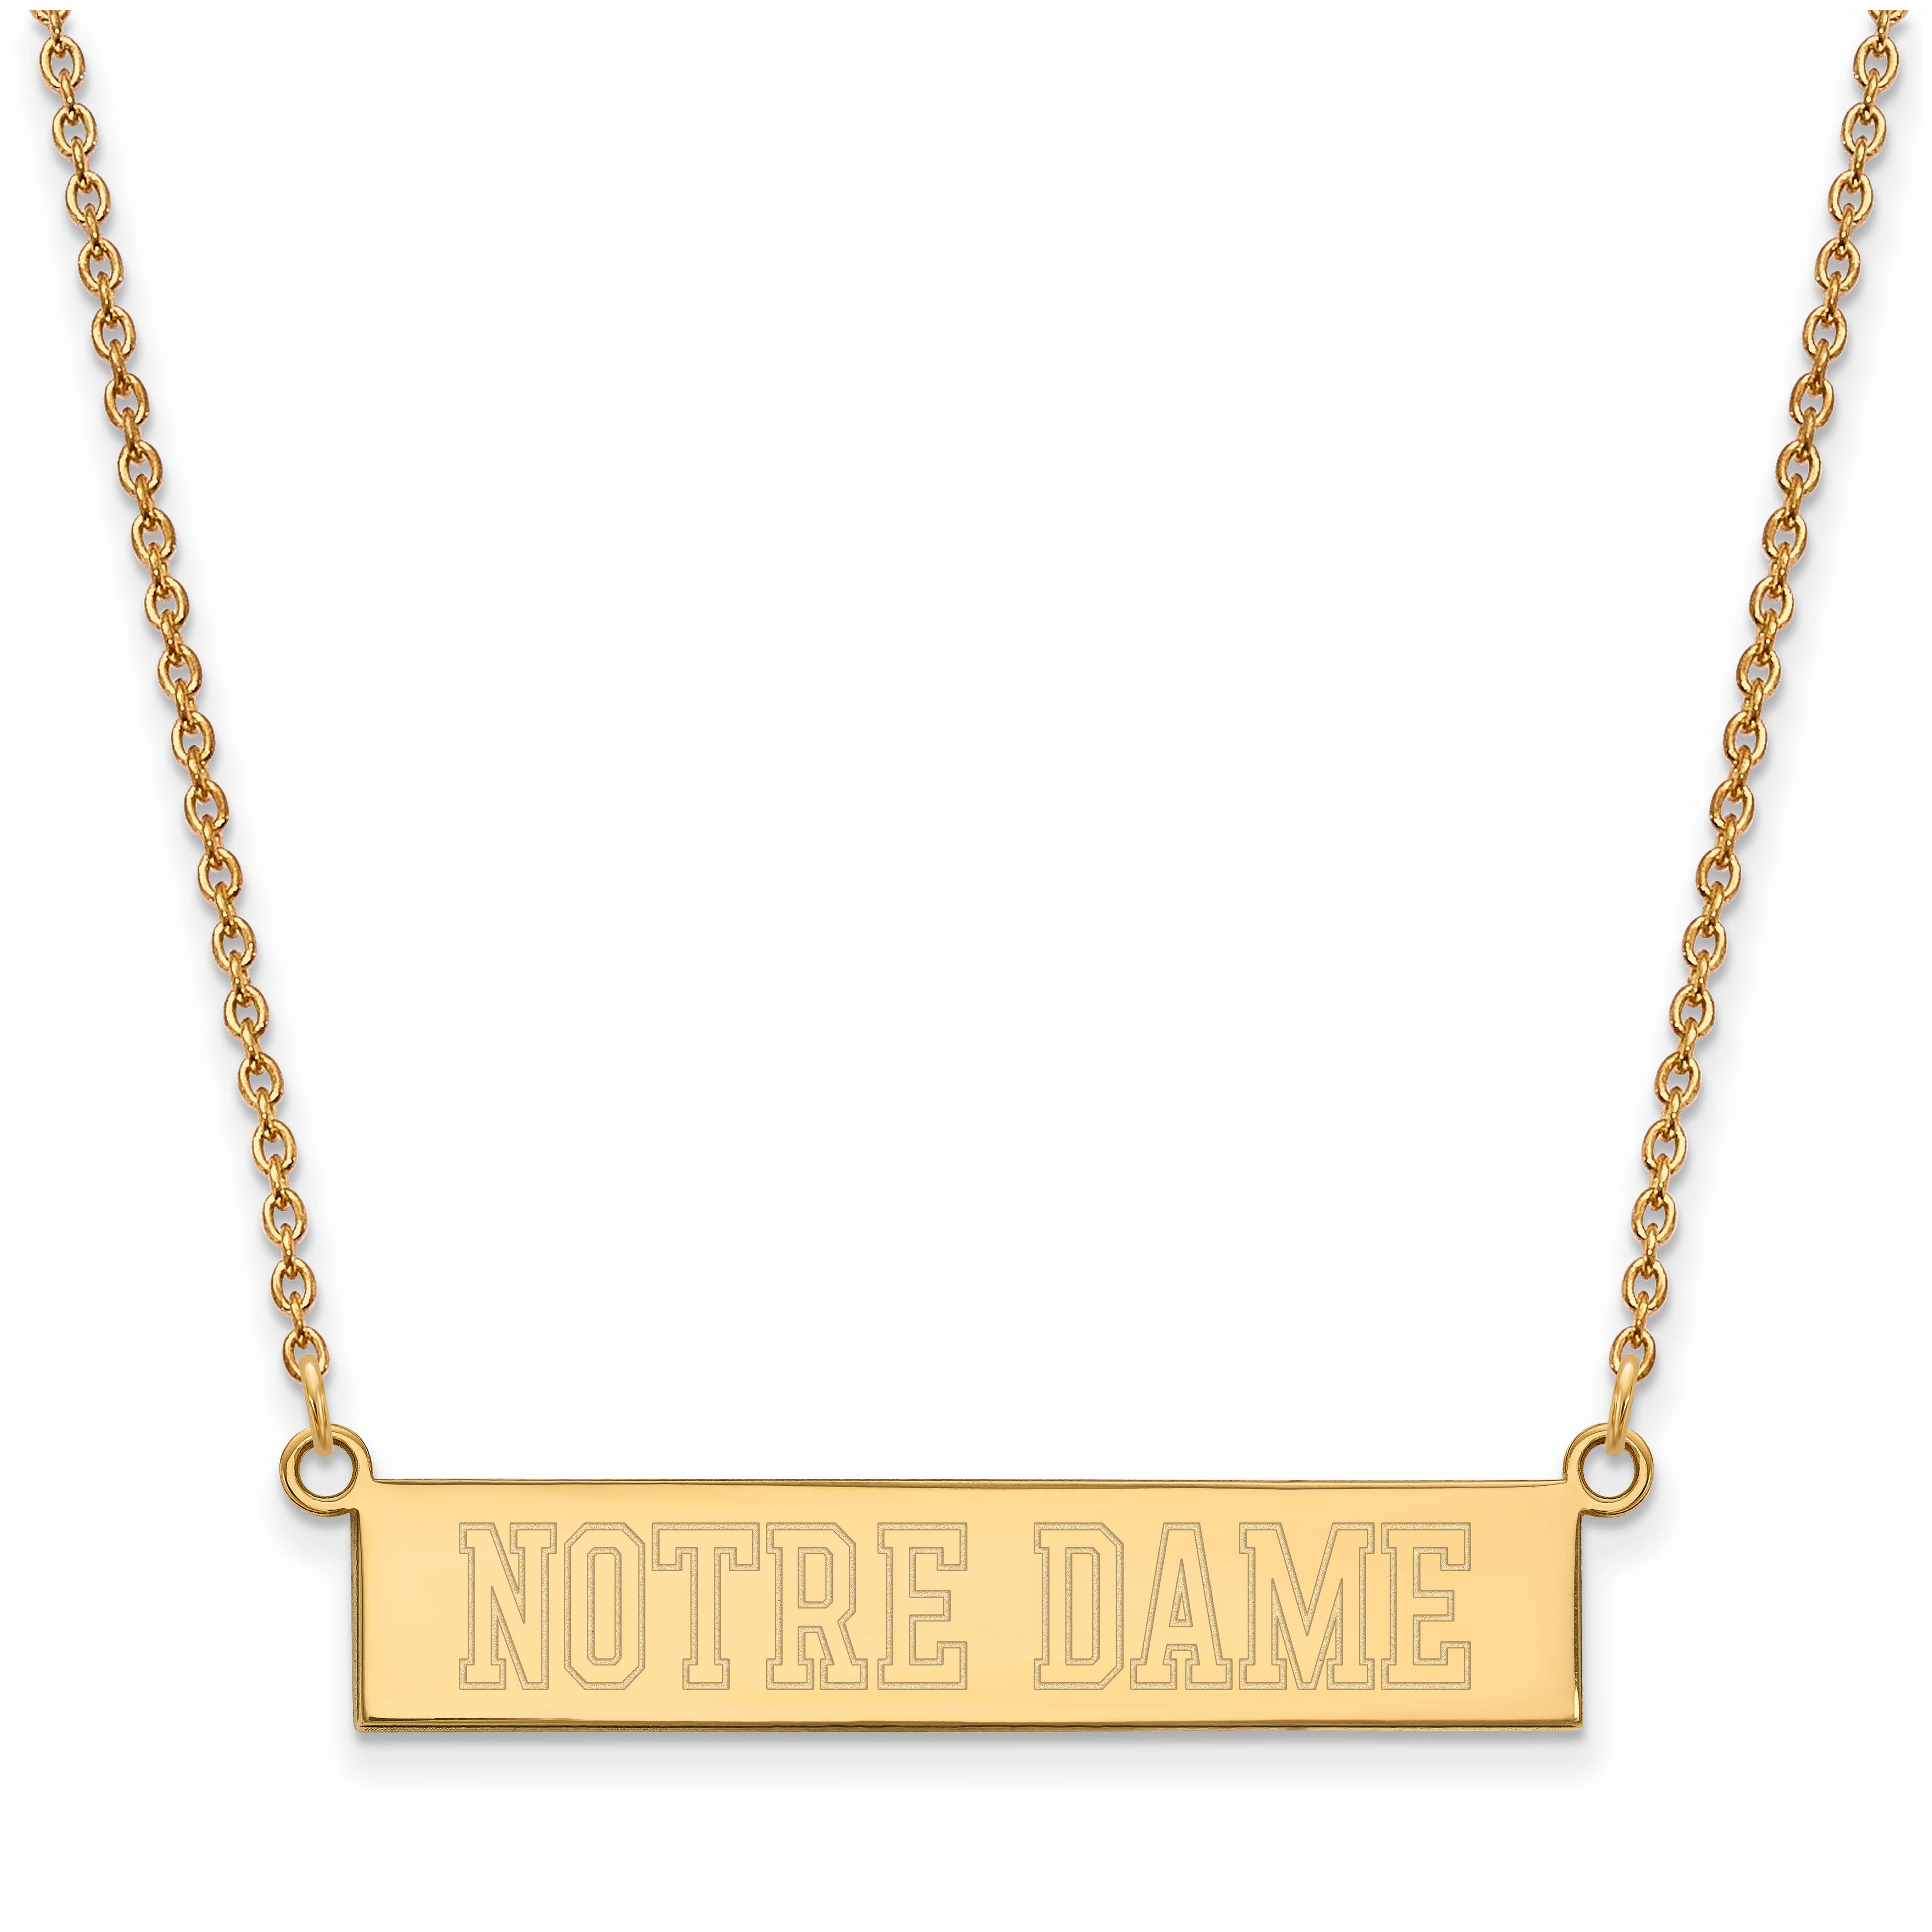 Women's Notre Dame Fighting Irish Gold Plated Small Bar Necklace - image 1 of 3